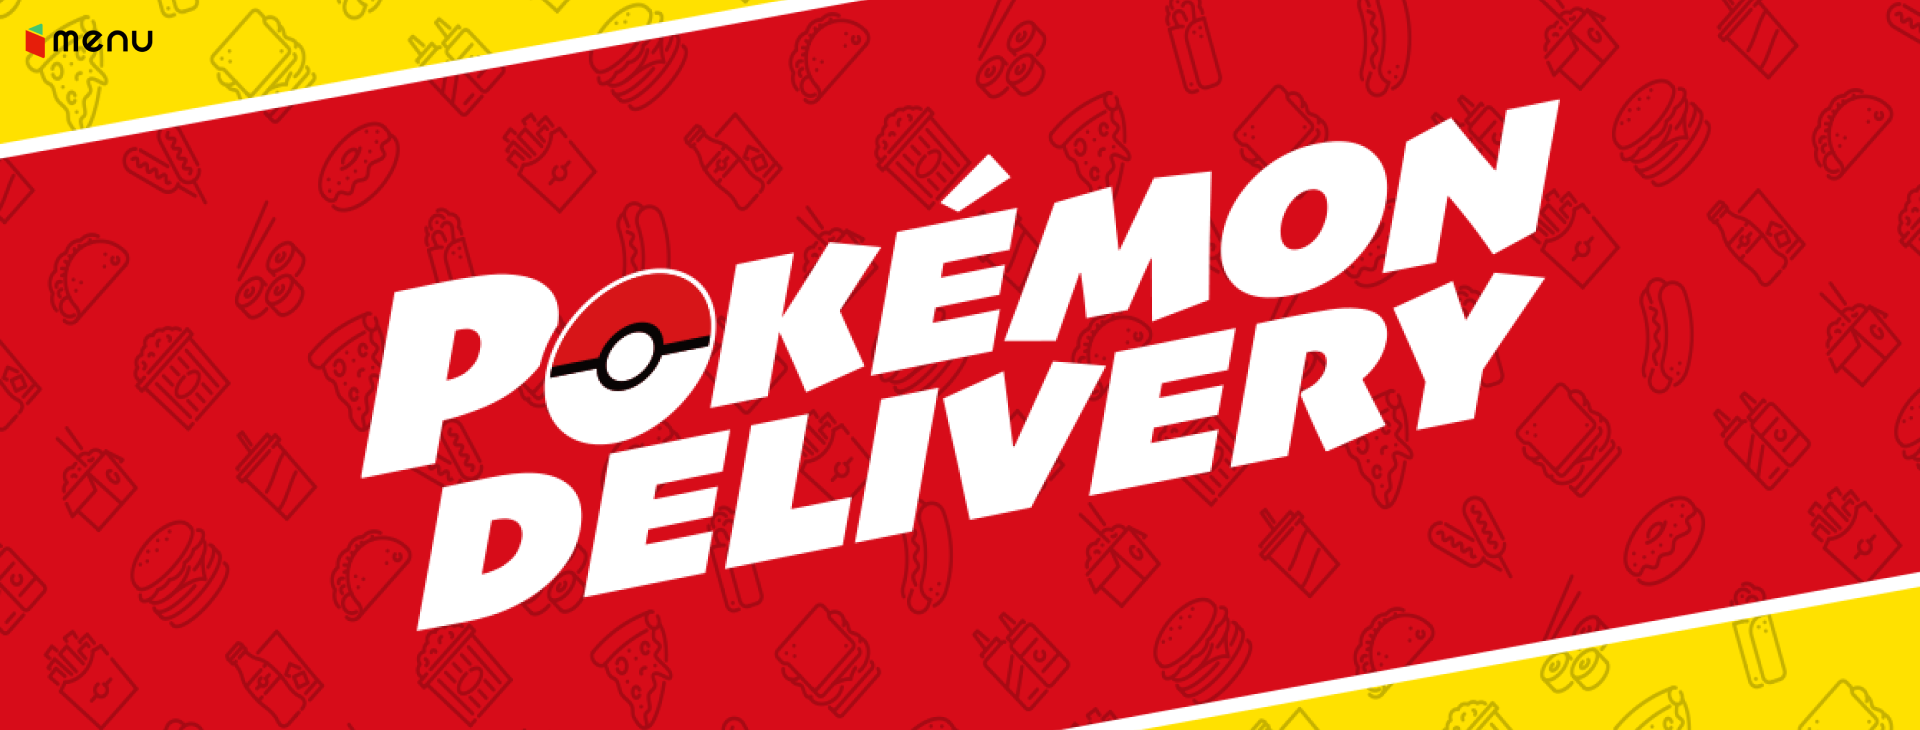 POKEMON DELIVERY -powered by menu-